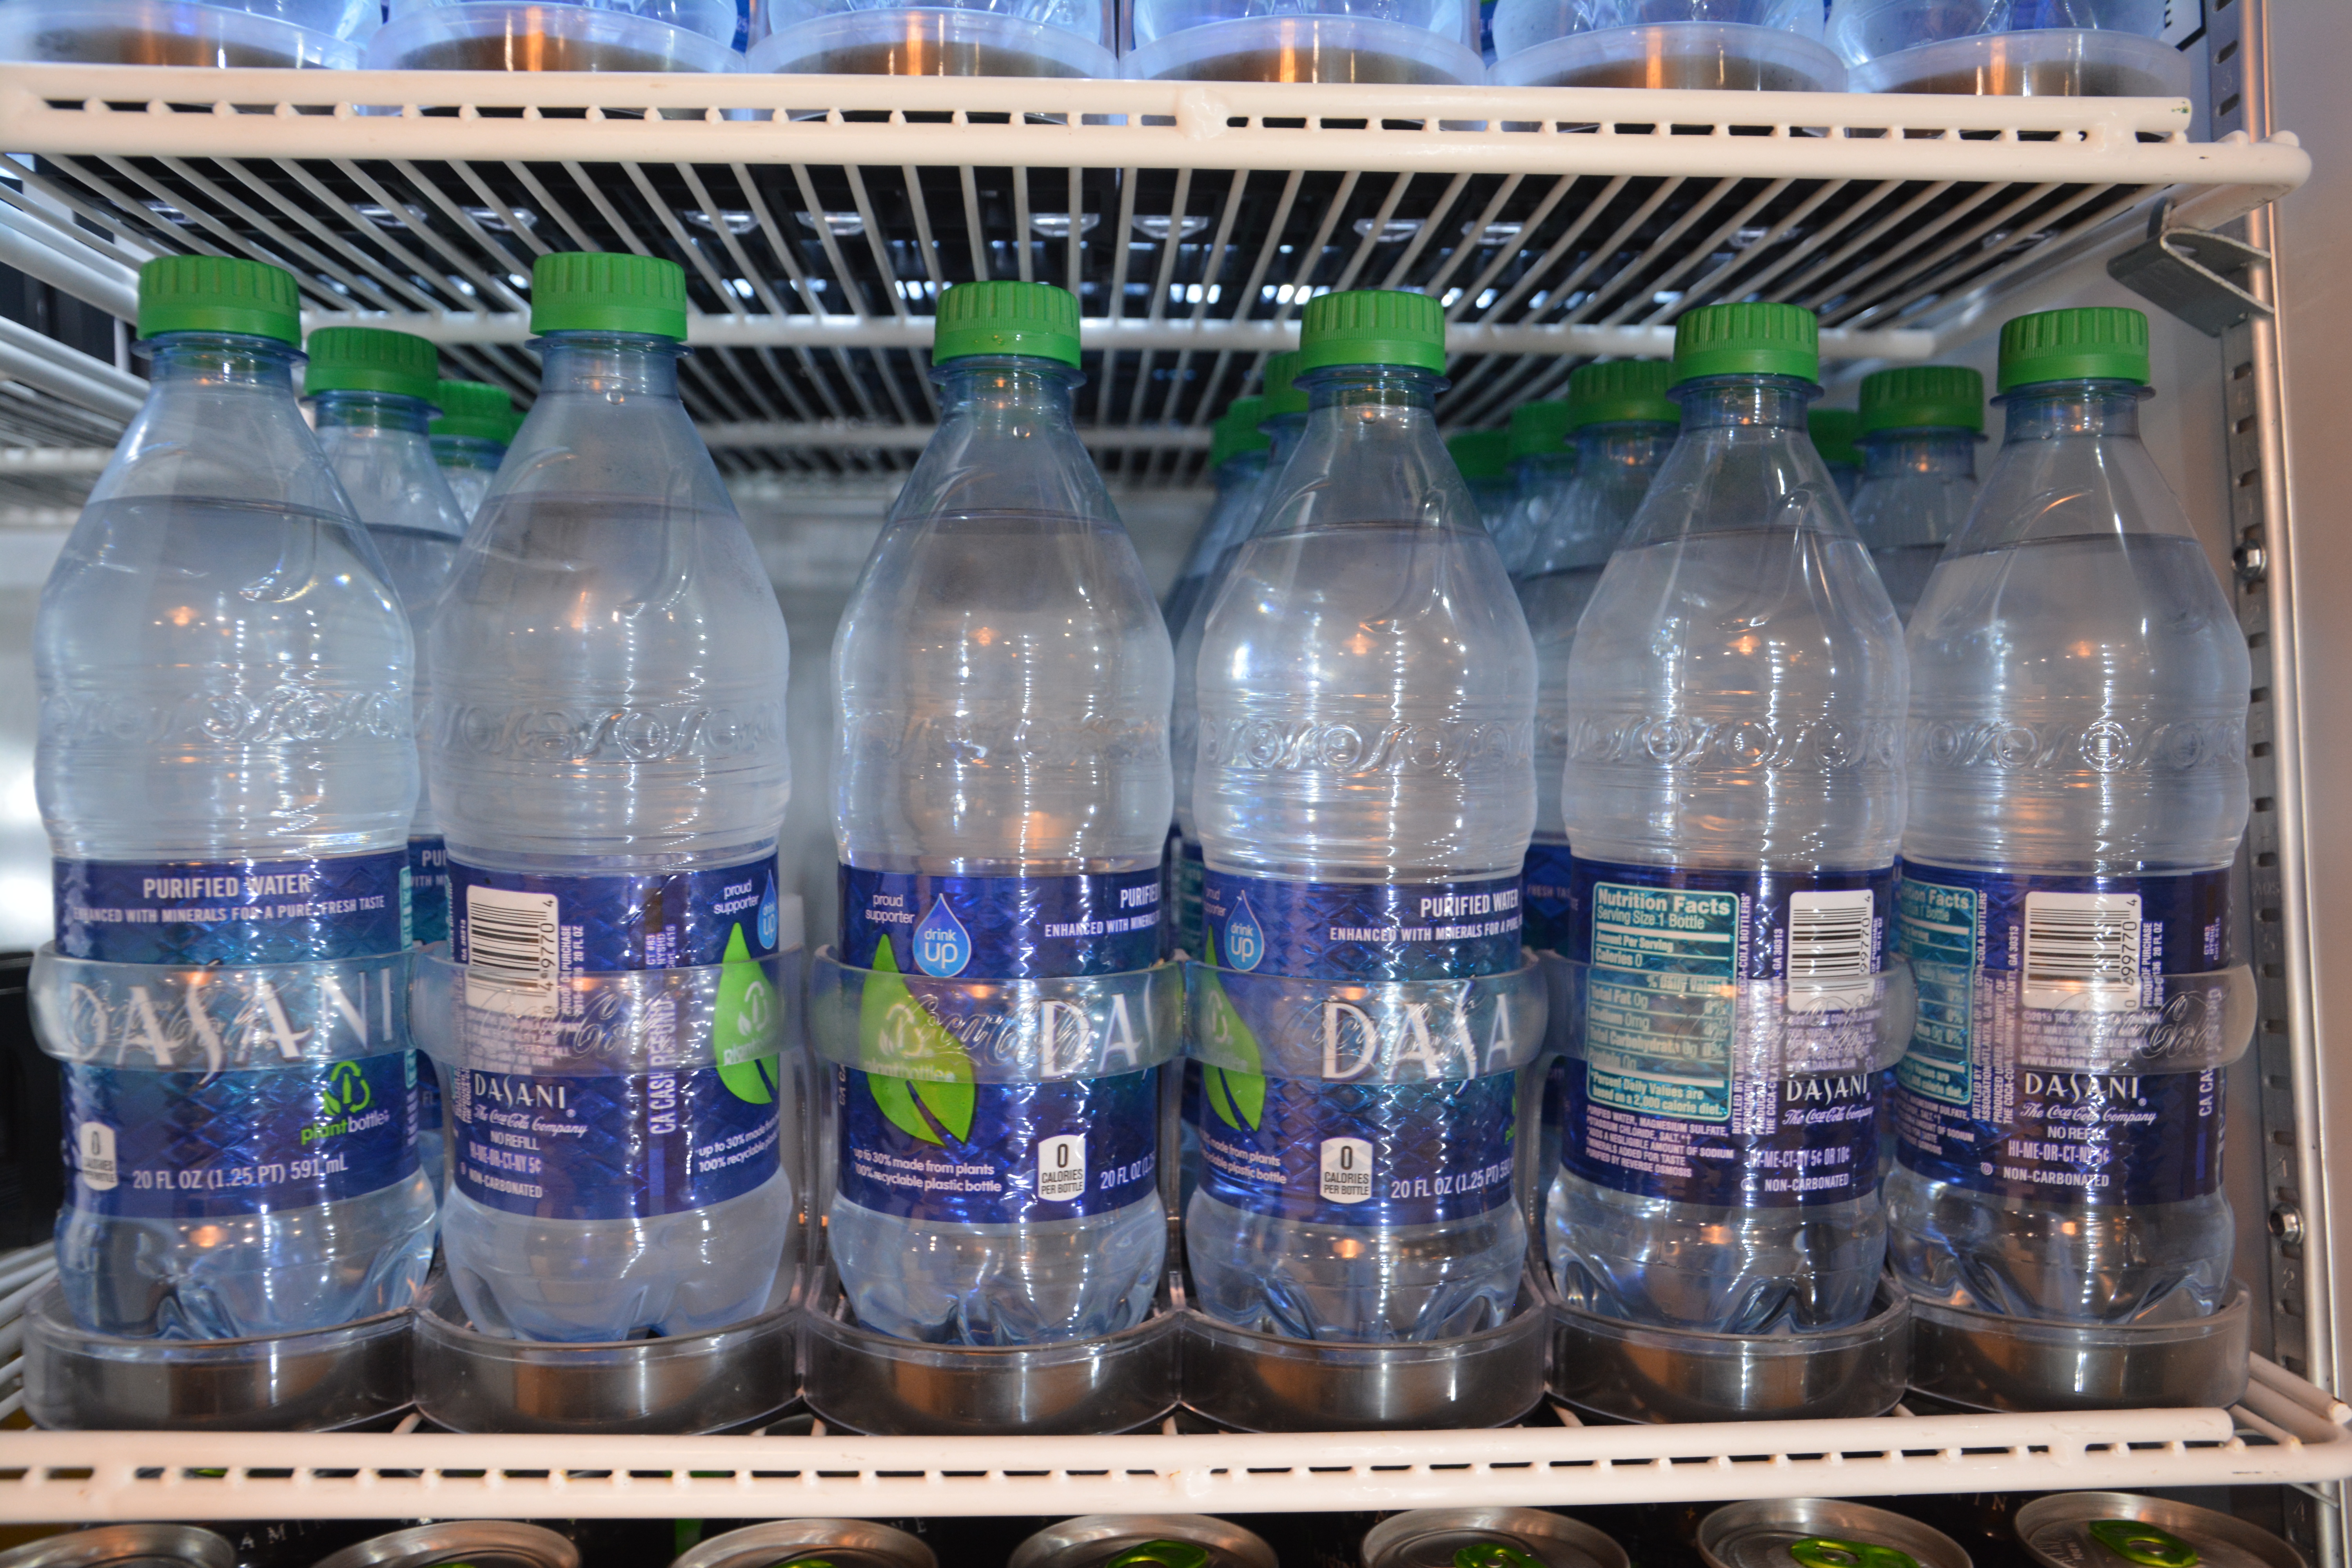 The cooler in the Marketplace offers Dasani water, a sub set of Coca-Cola.